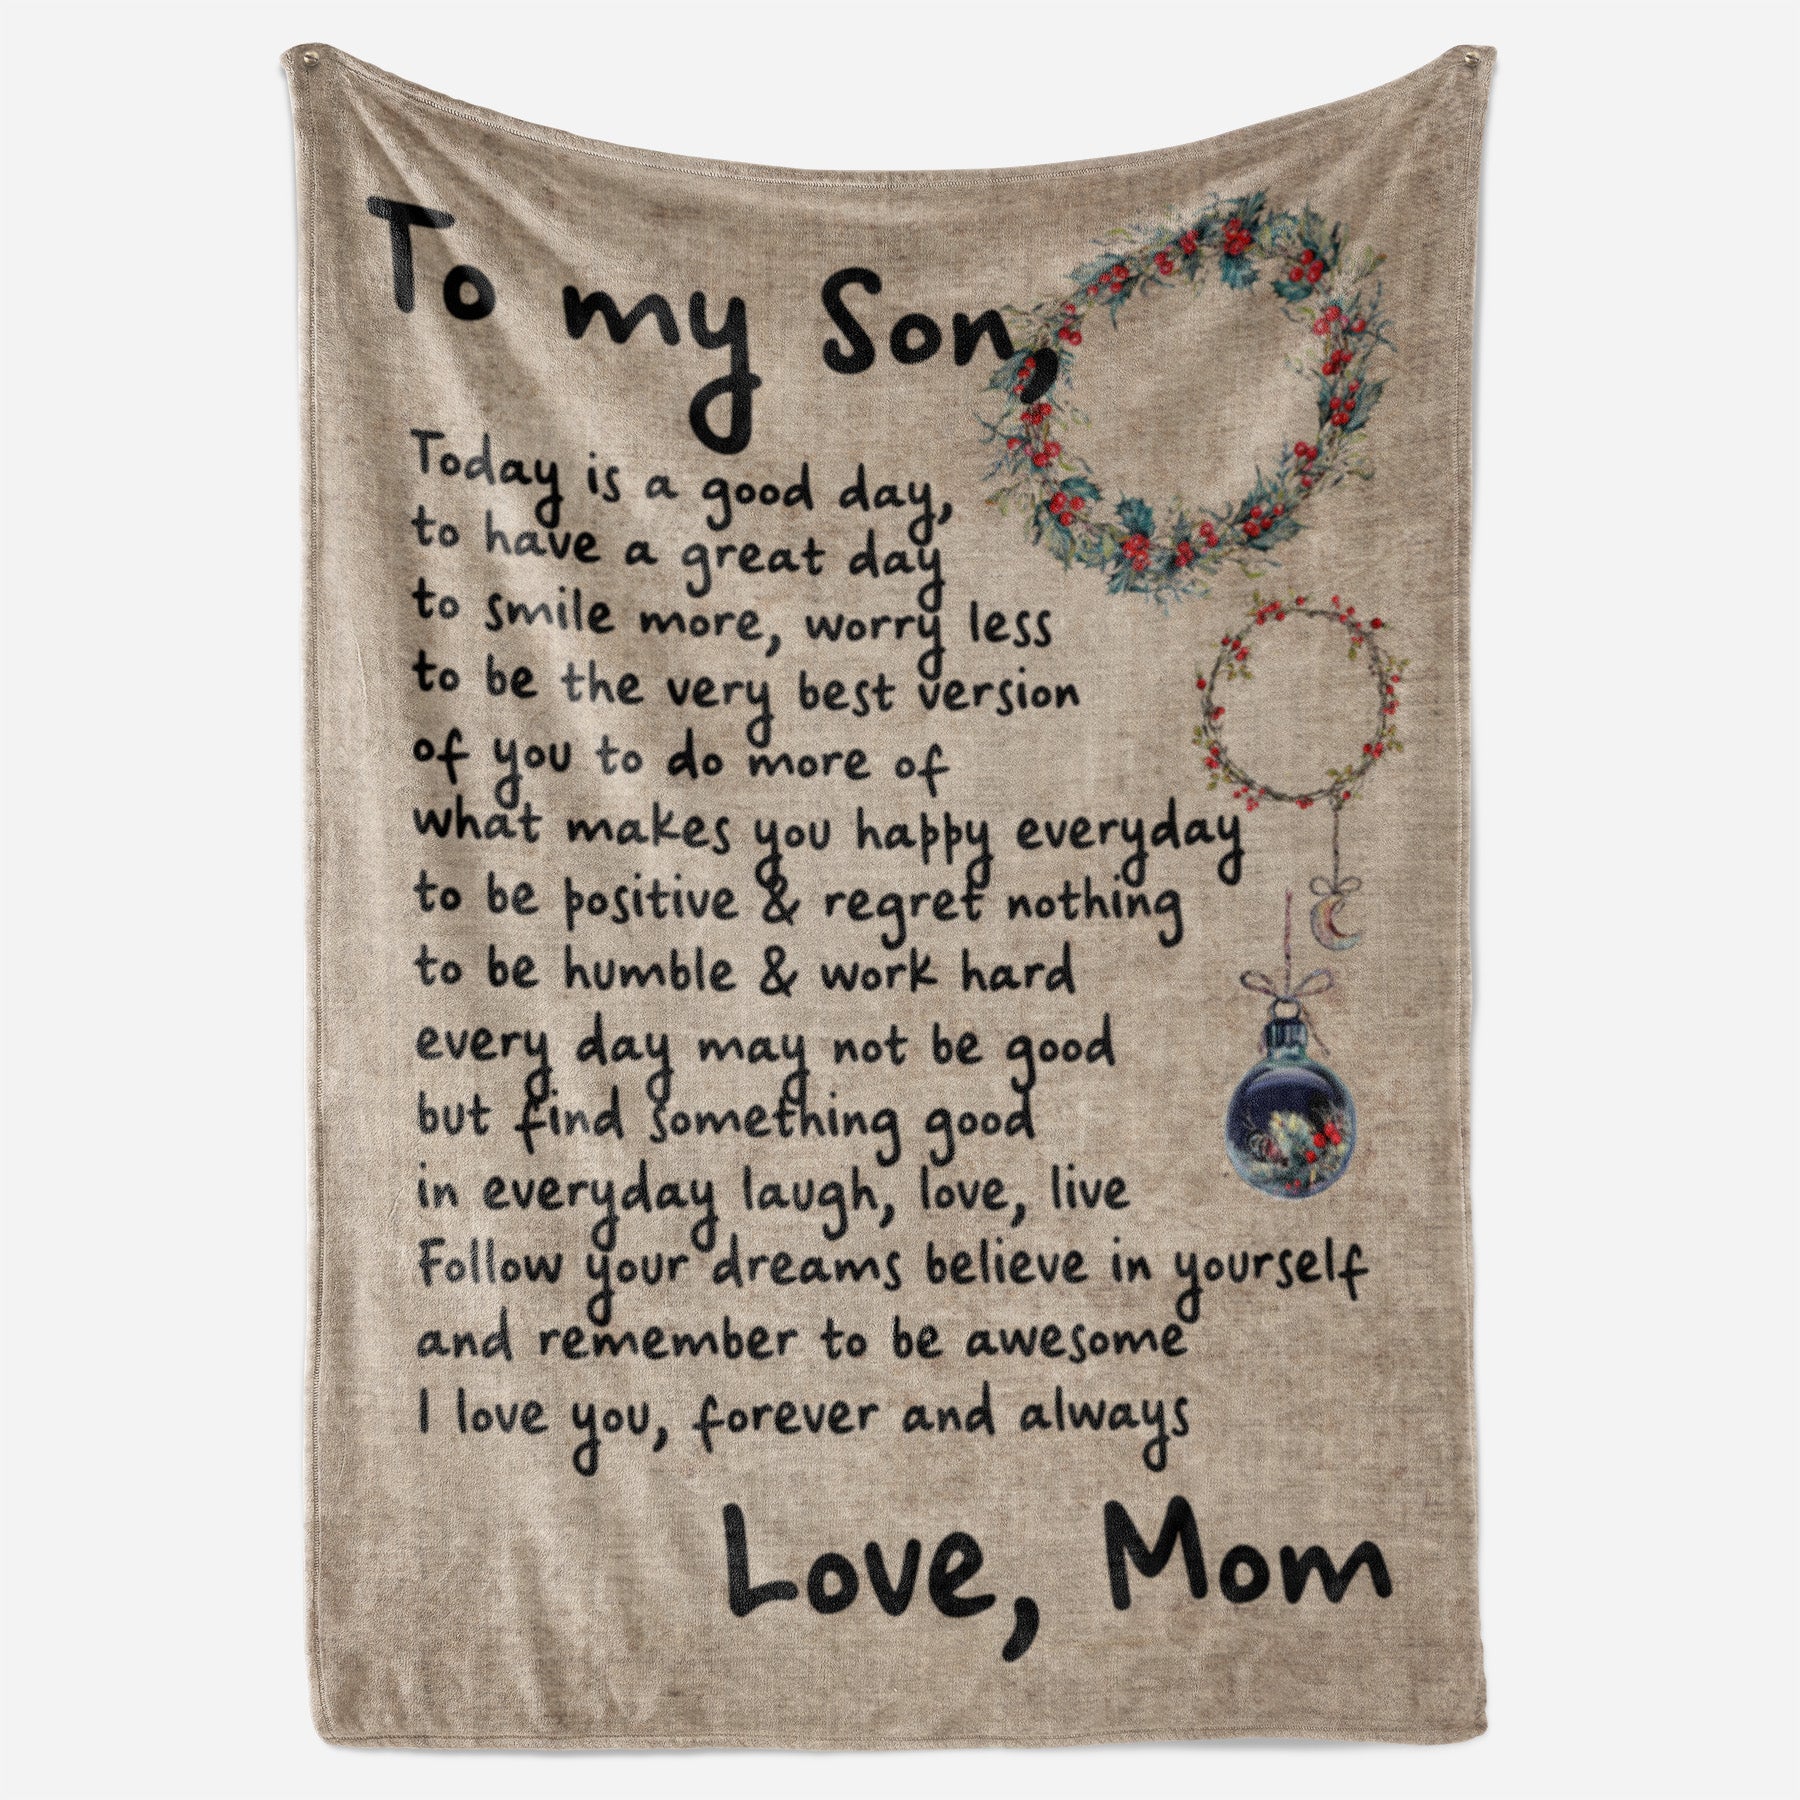 Blanket Gifts For Sons From Mothers, Gifts For 16 Year Old Son, Worry Less